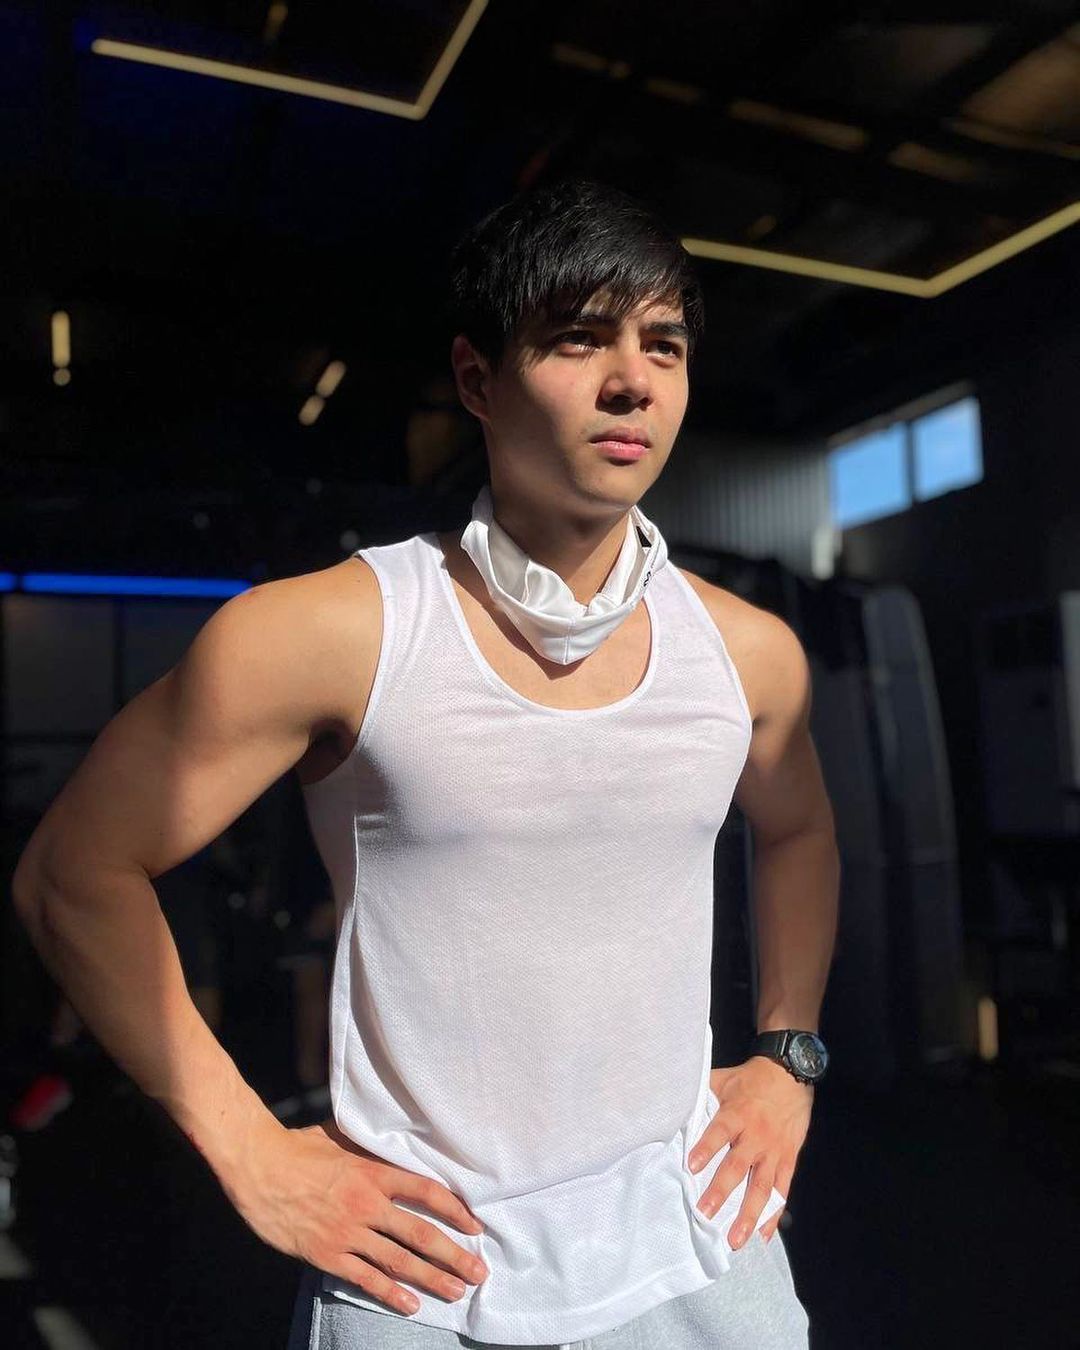 Paul Salas opens up about reason behind breakup with ex-gf Barbie Imperial